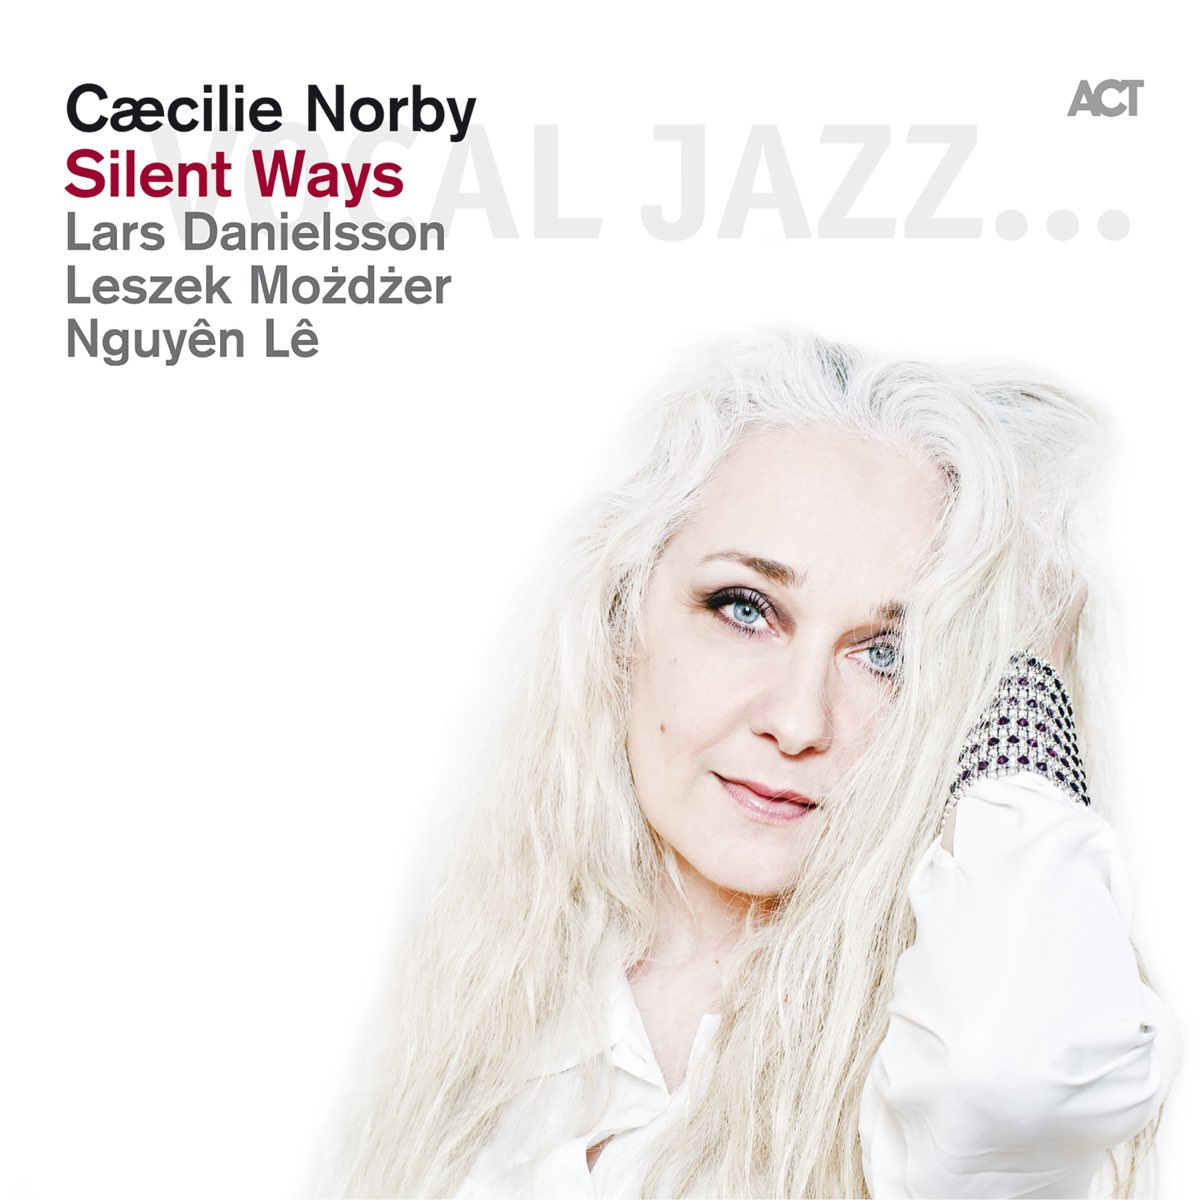 Silent Ways by Cæcilie Norby on Apple Music